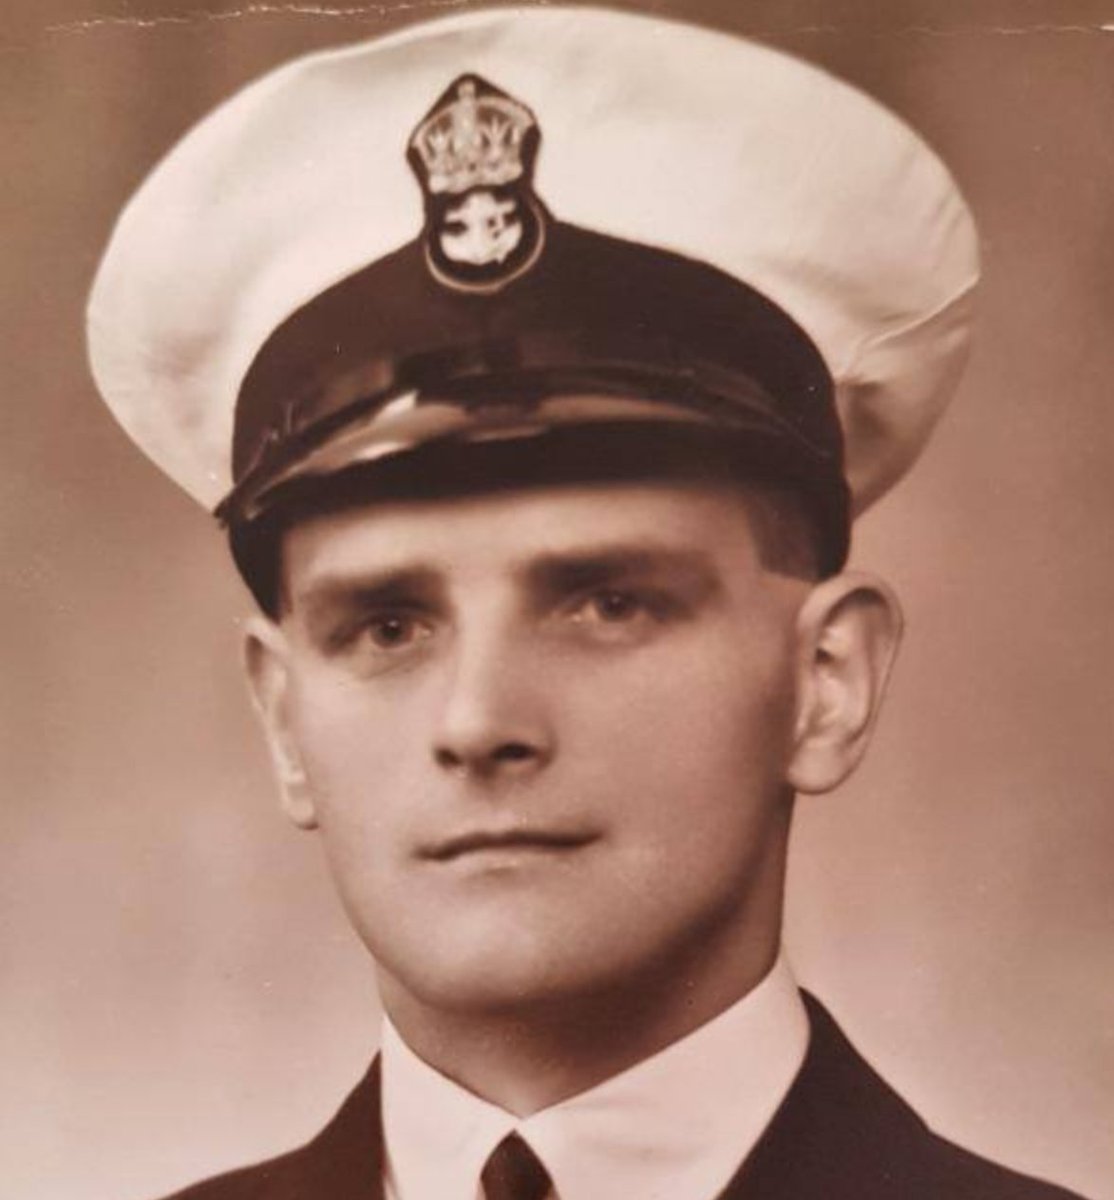 Ivan J Cunningham
A leader who I never got to meet. We have a lot of things in common, The ocean and a healthy respect, he was also tall and very good looking.

Lest we forget 3/03/1942 #HMASPerth